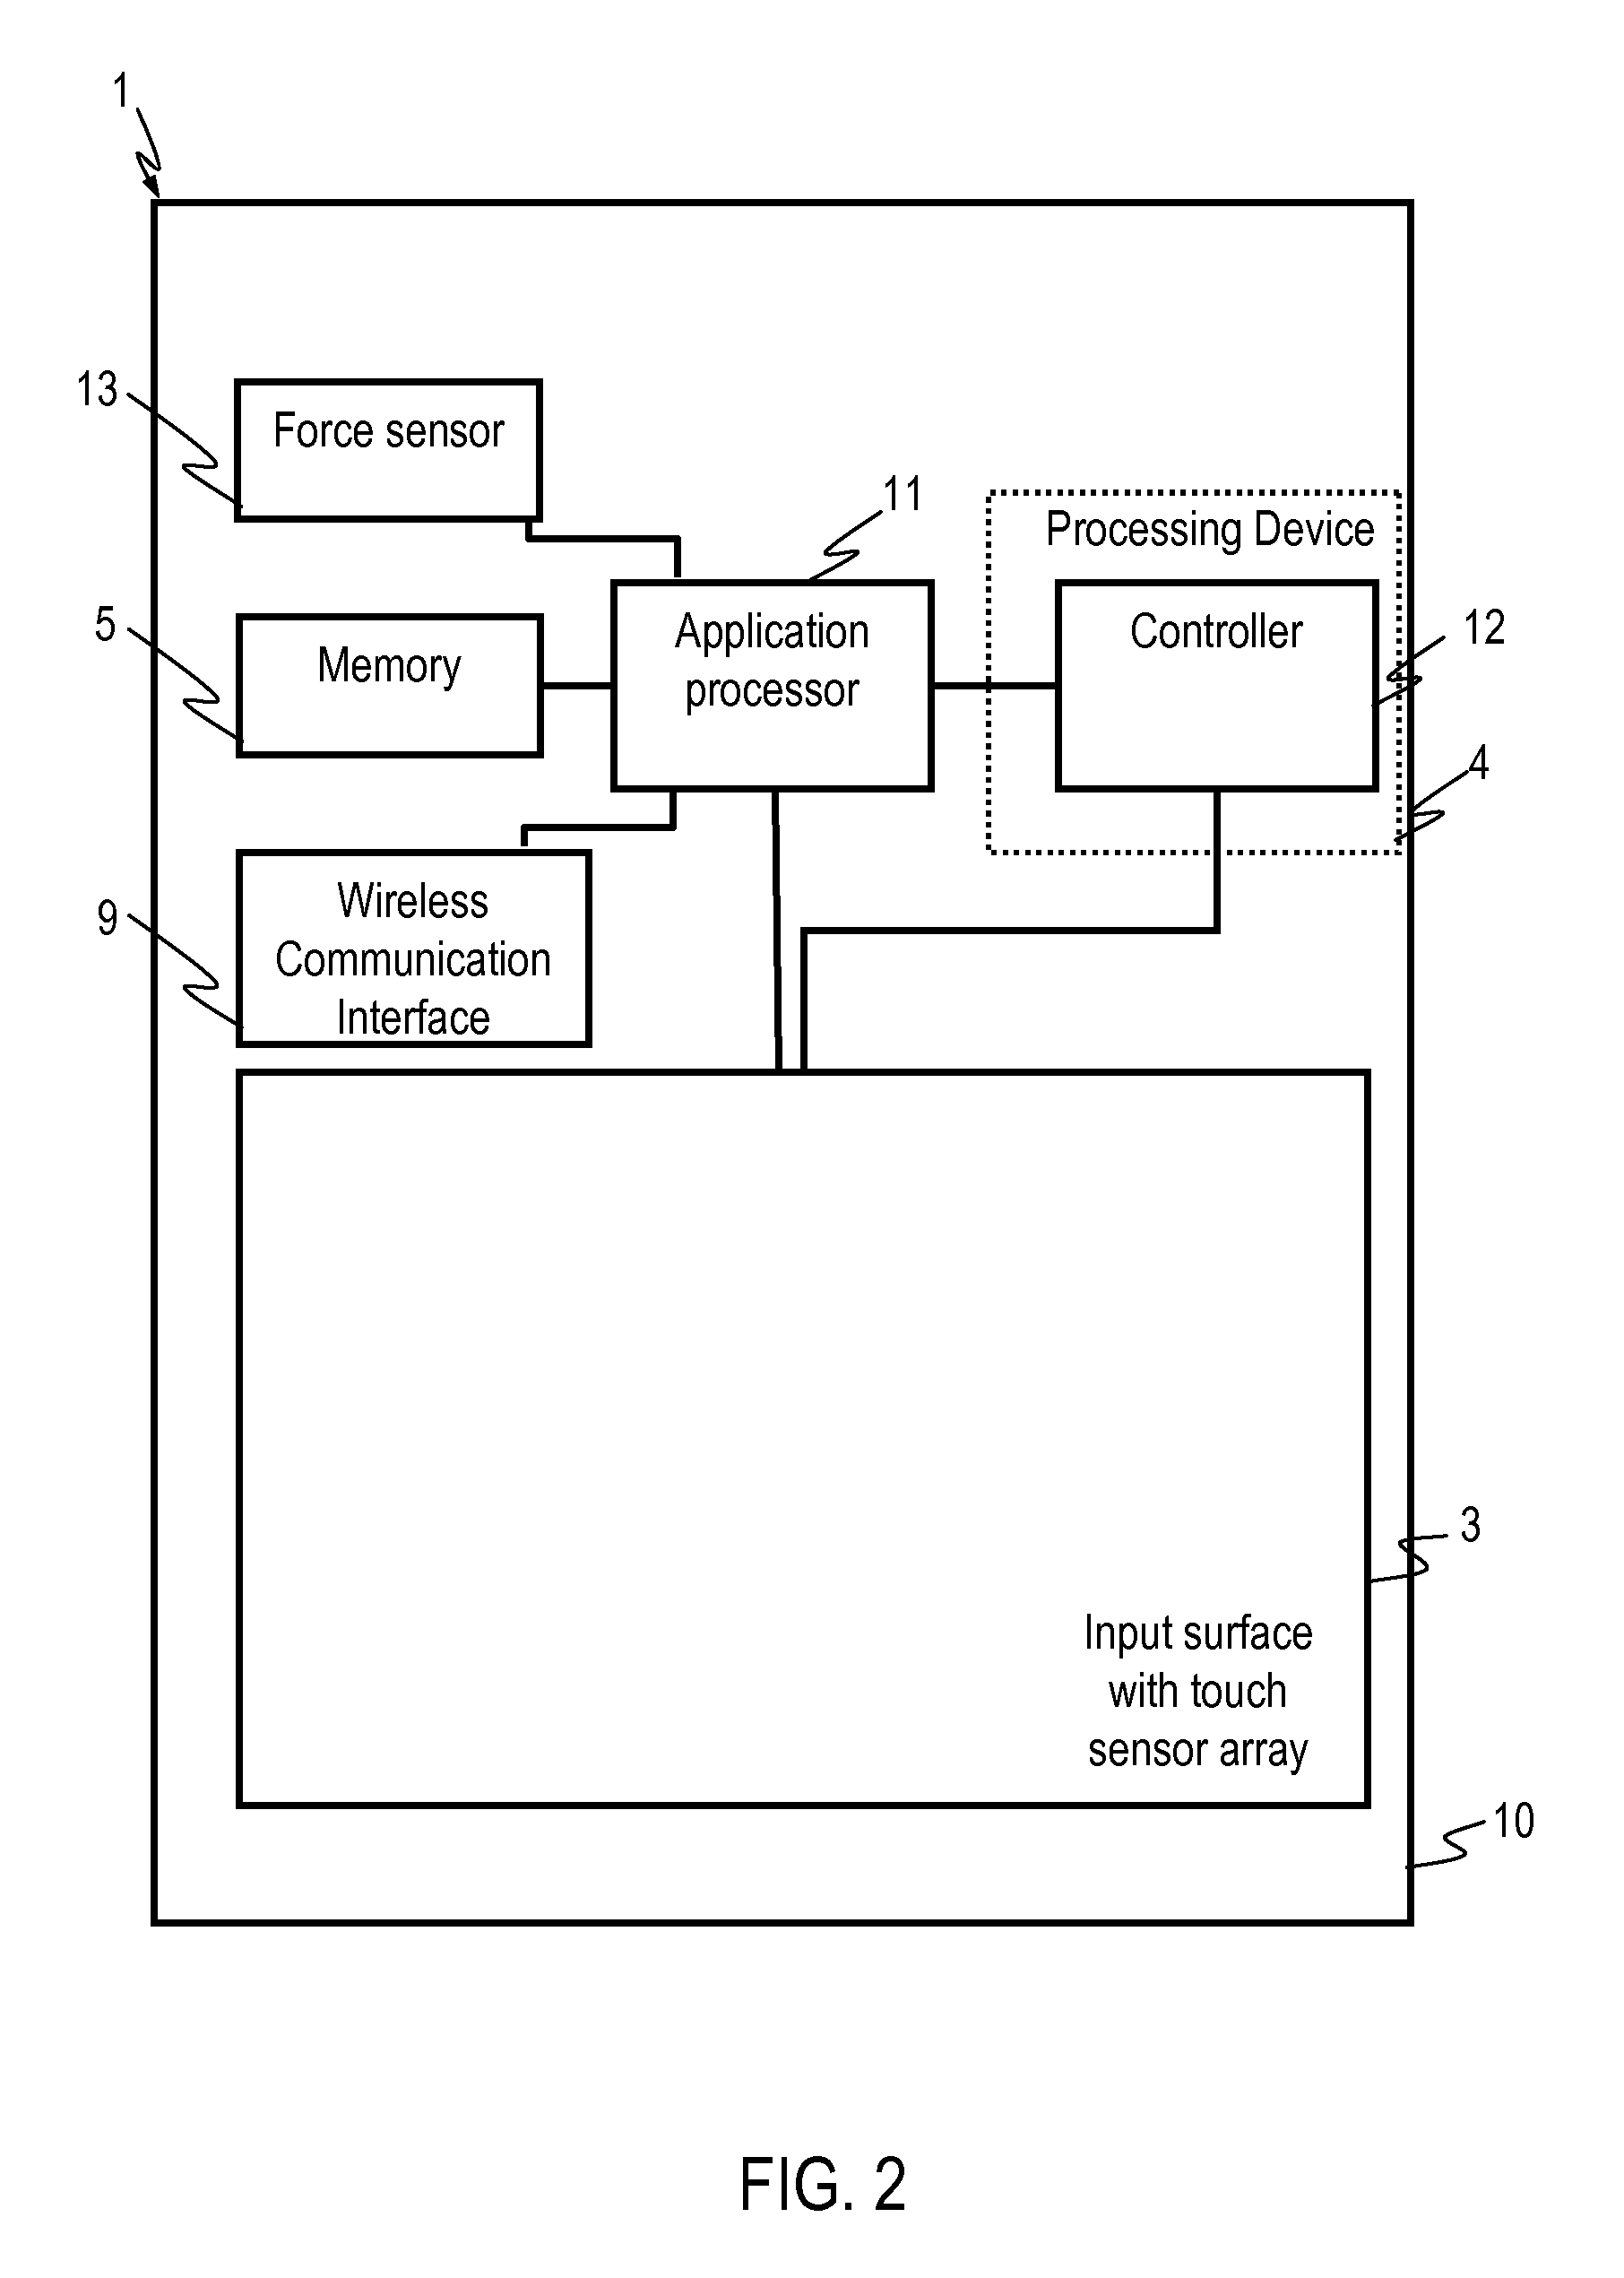 Electronic device and method of processing user actuation of a touch-sensitive input surface